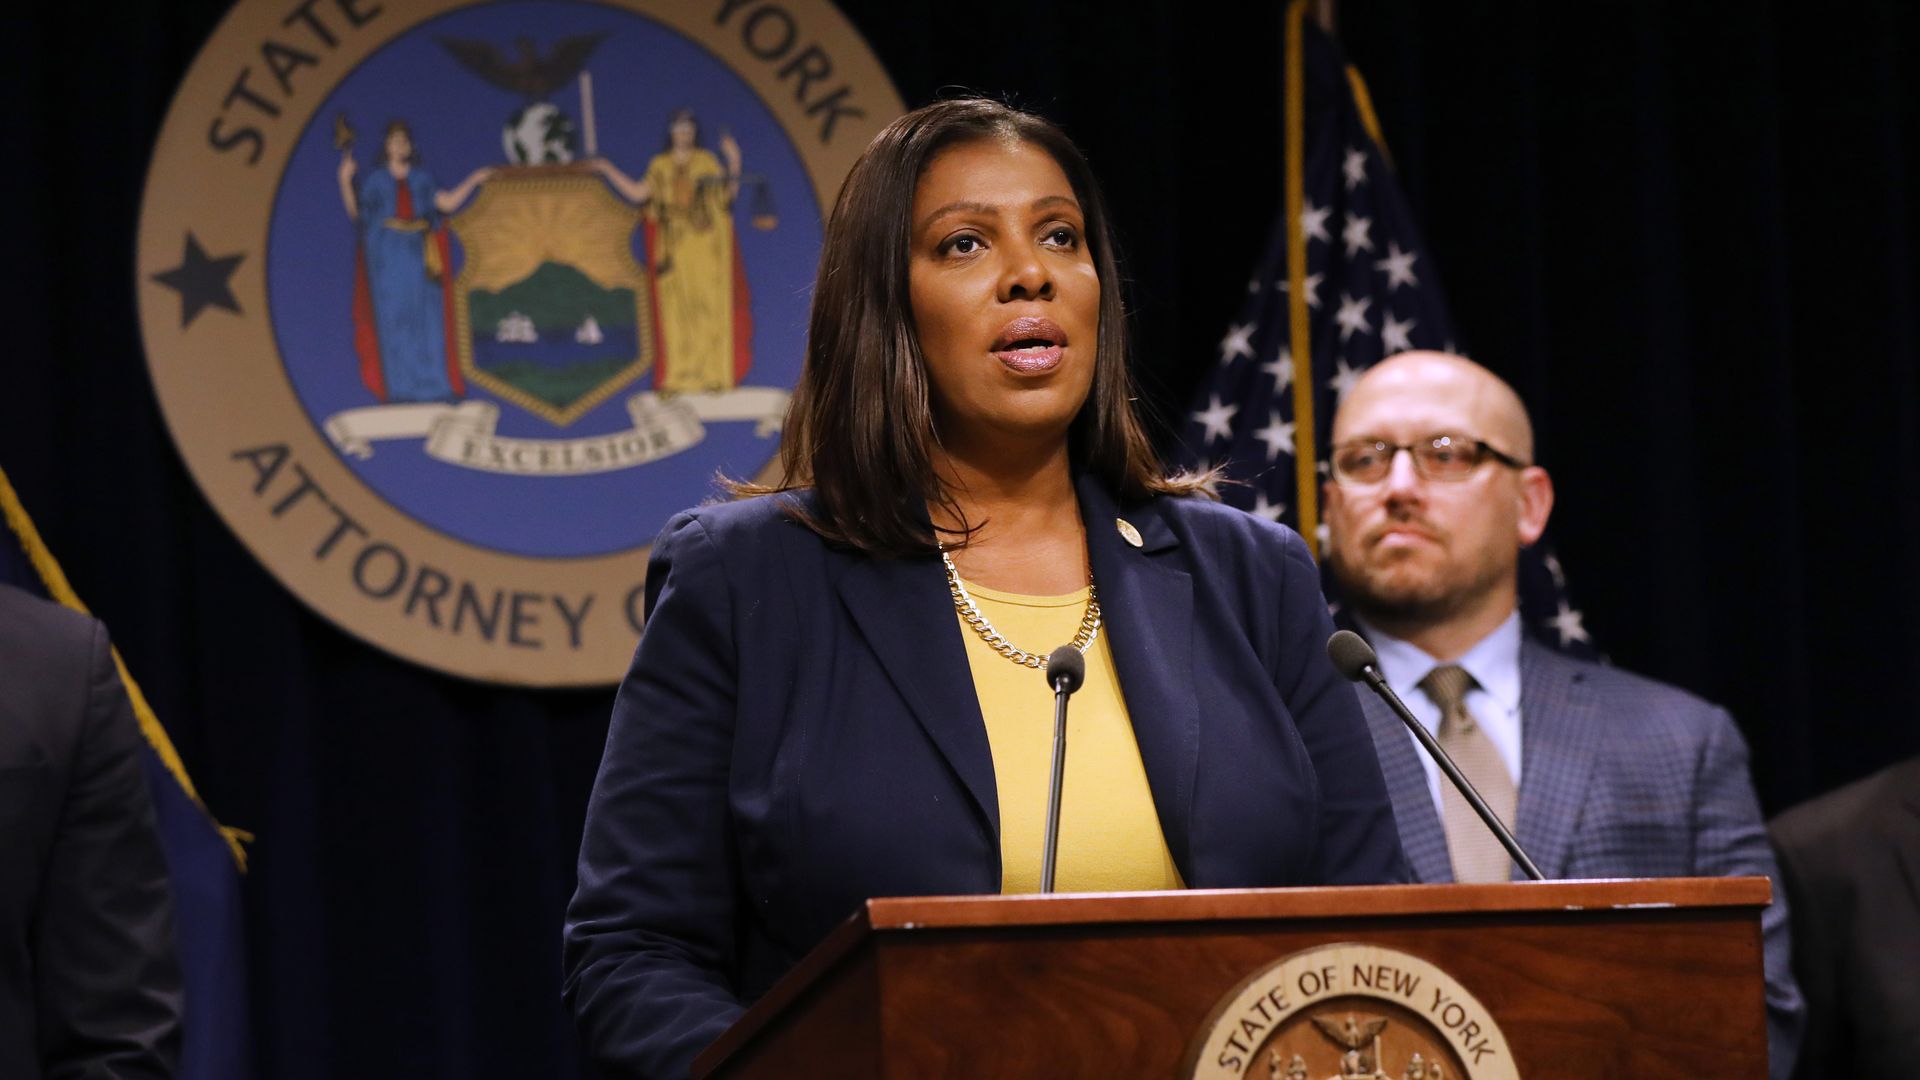  State Attorney General Letitia James announces a lawsuit against e-cigarette giant Juul on November 19, 2019 in New York City